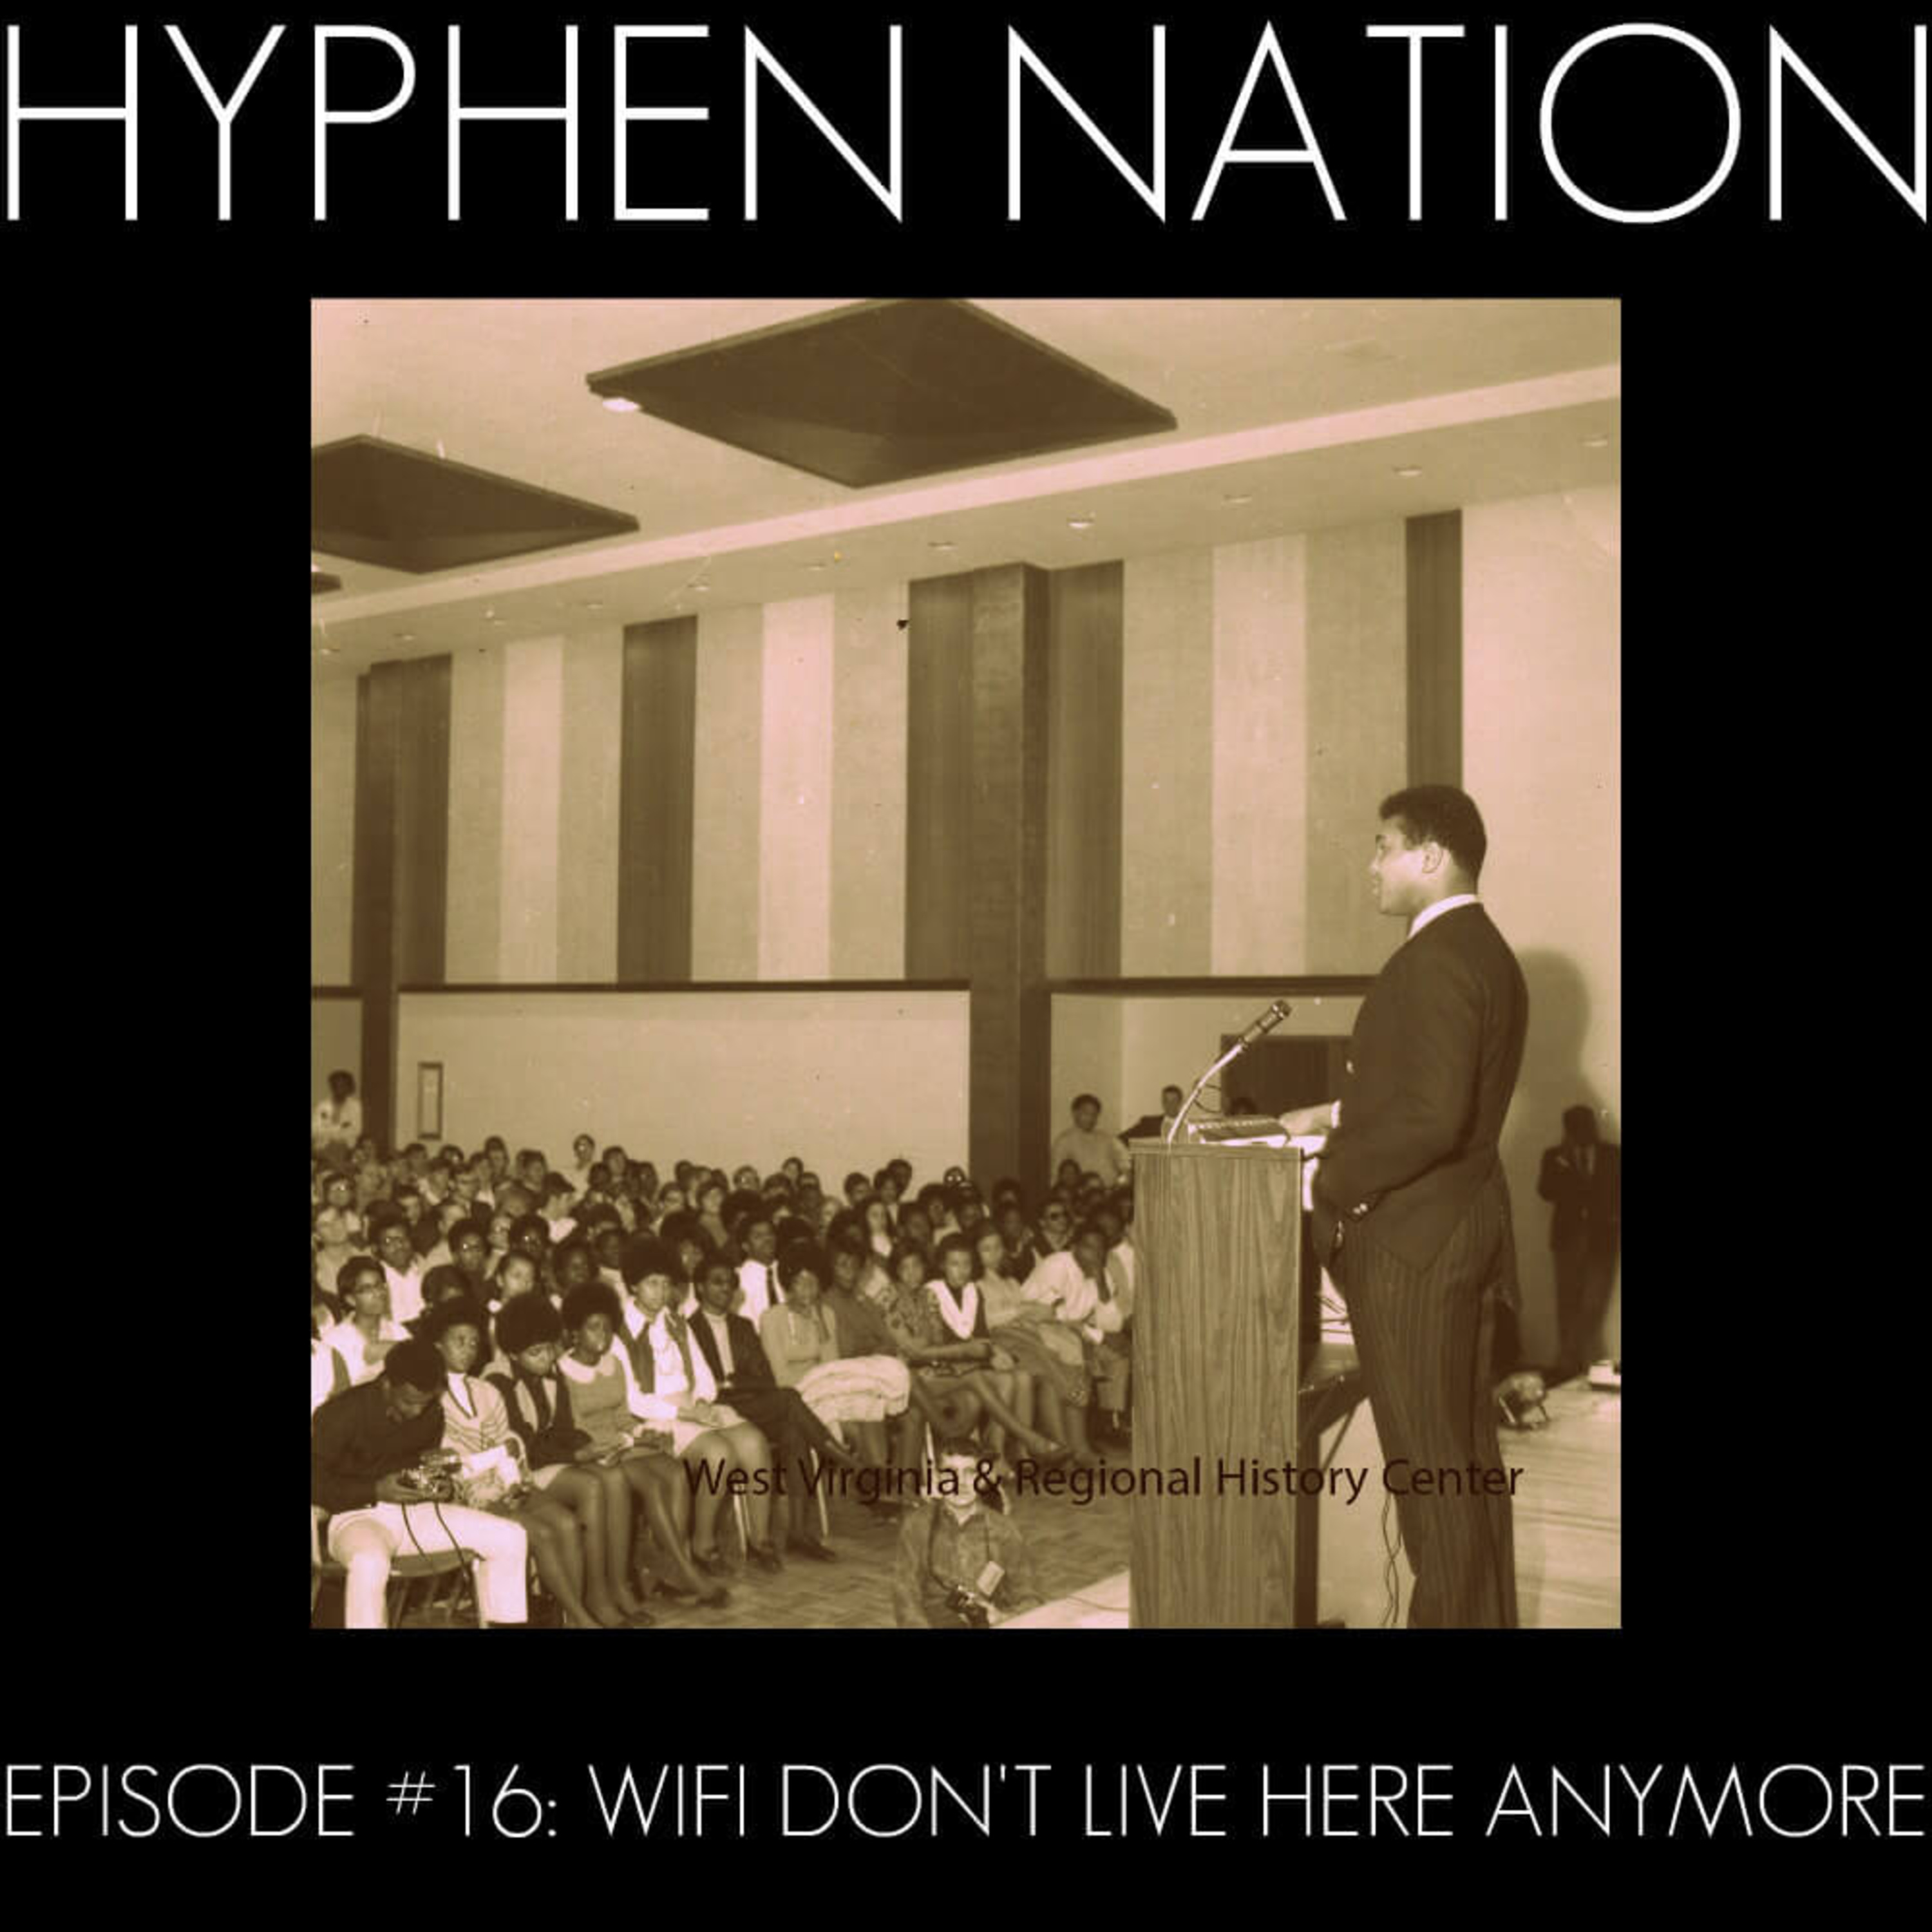 Episode #16: Wifi Don’t Live Here Anymore